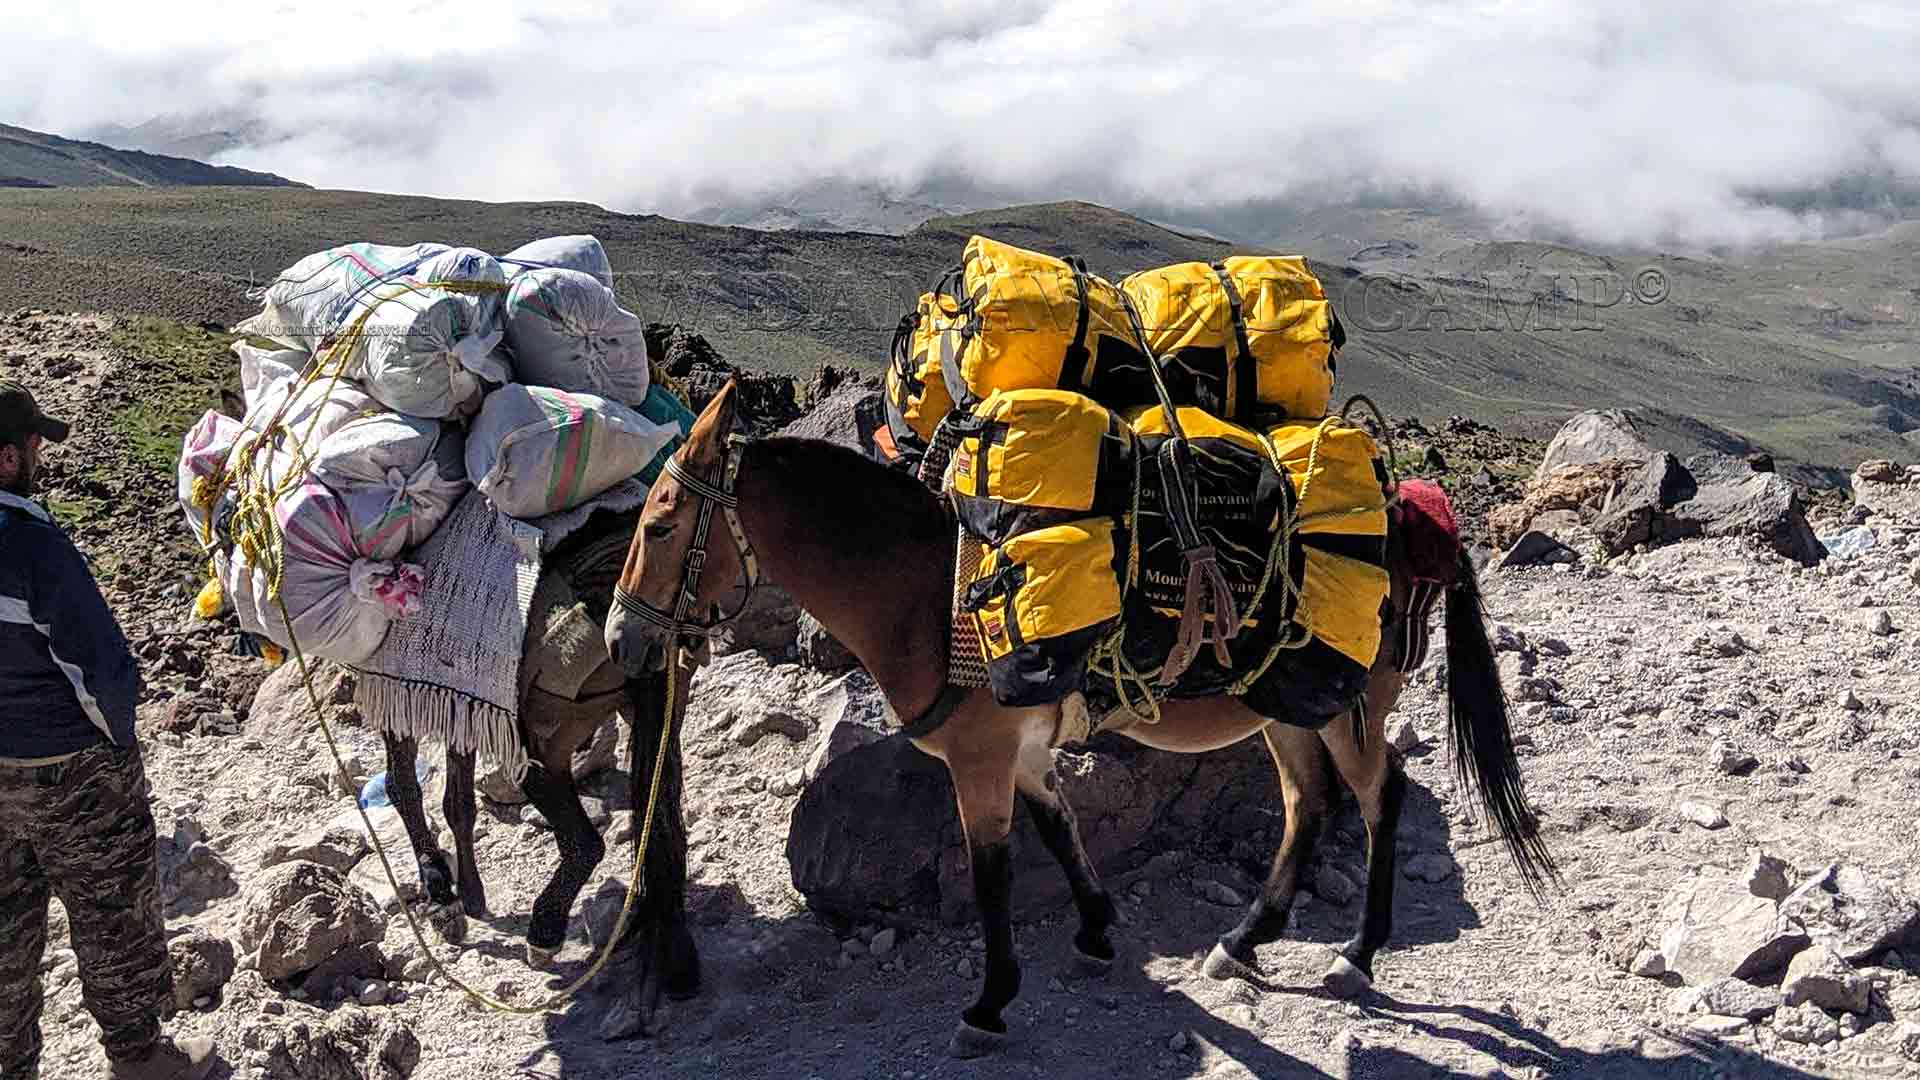 Pack animals, burdened with duffel bags, transport luggage to the campsite.